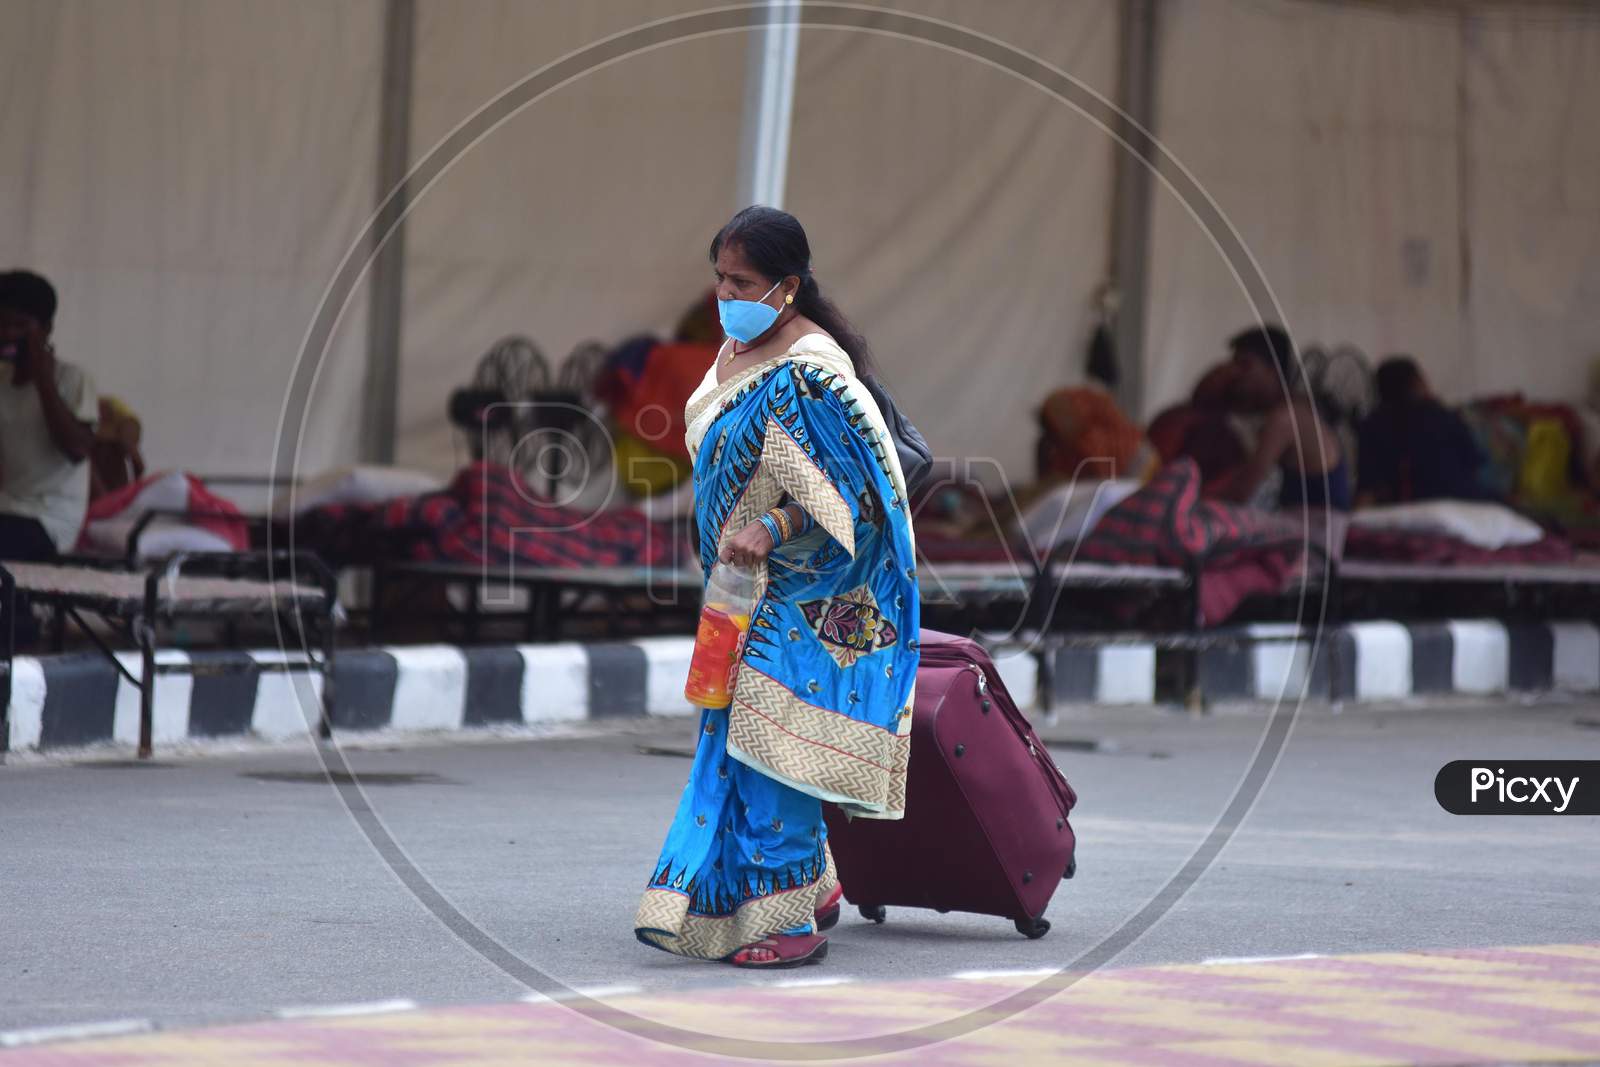 Passengers Along With Their Luggage Arrive At Guwahati Railway Station To Board A Train, After The Government Eased A Nationwide Lockdown In Guwahati ,India On June 14, 2020.